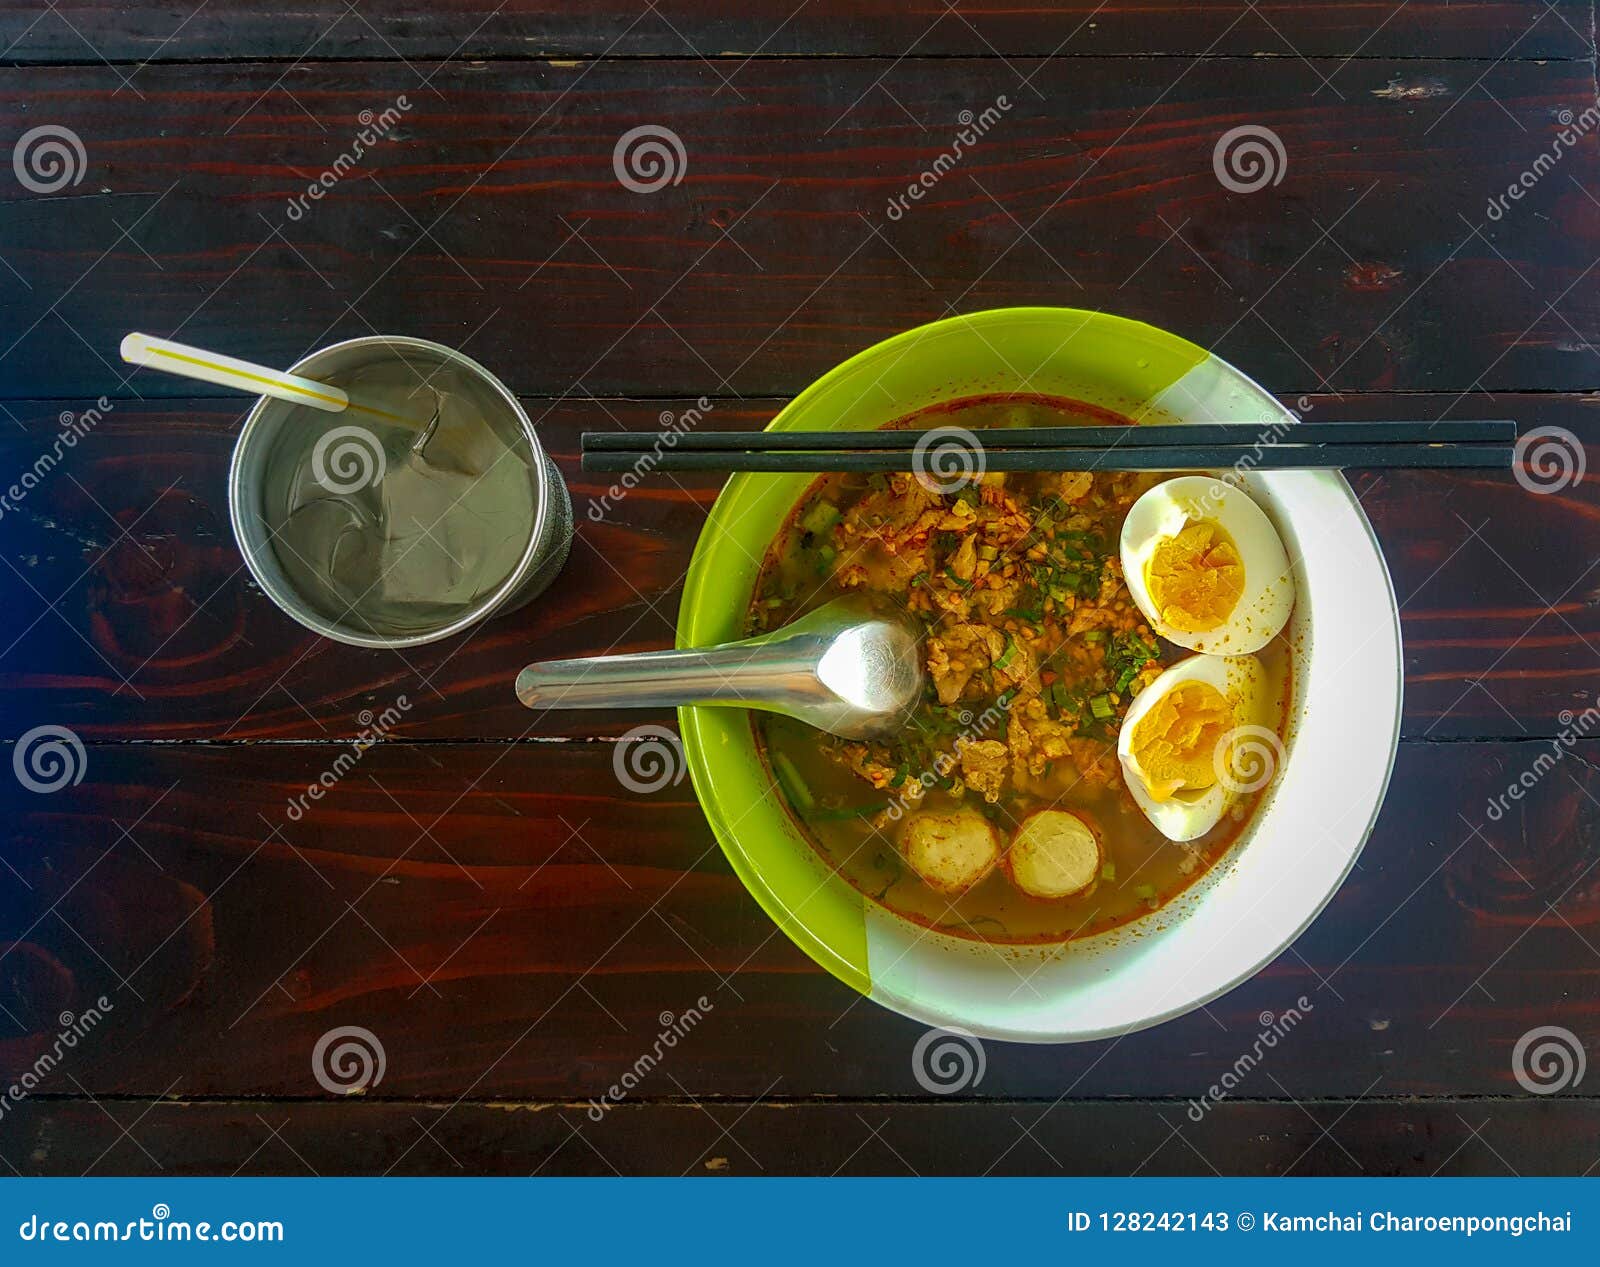 thai style chopped pork noodle garnished with pork balls, half-cutted boiled egg